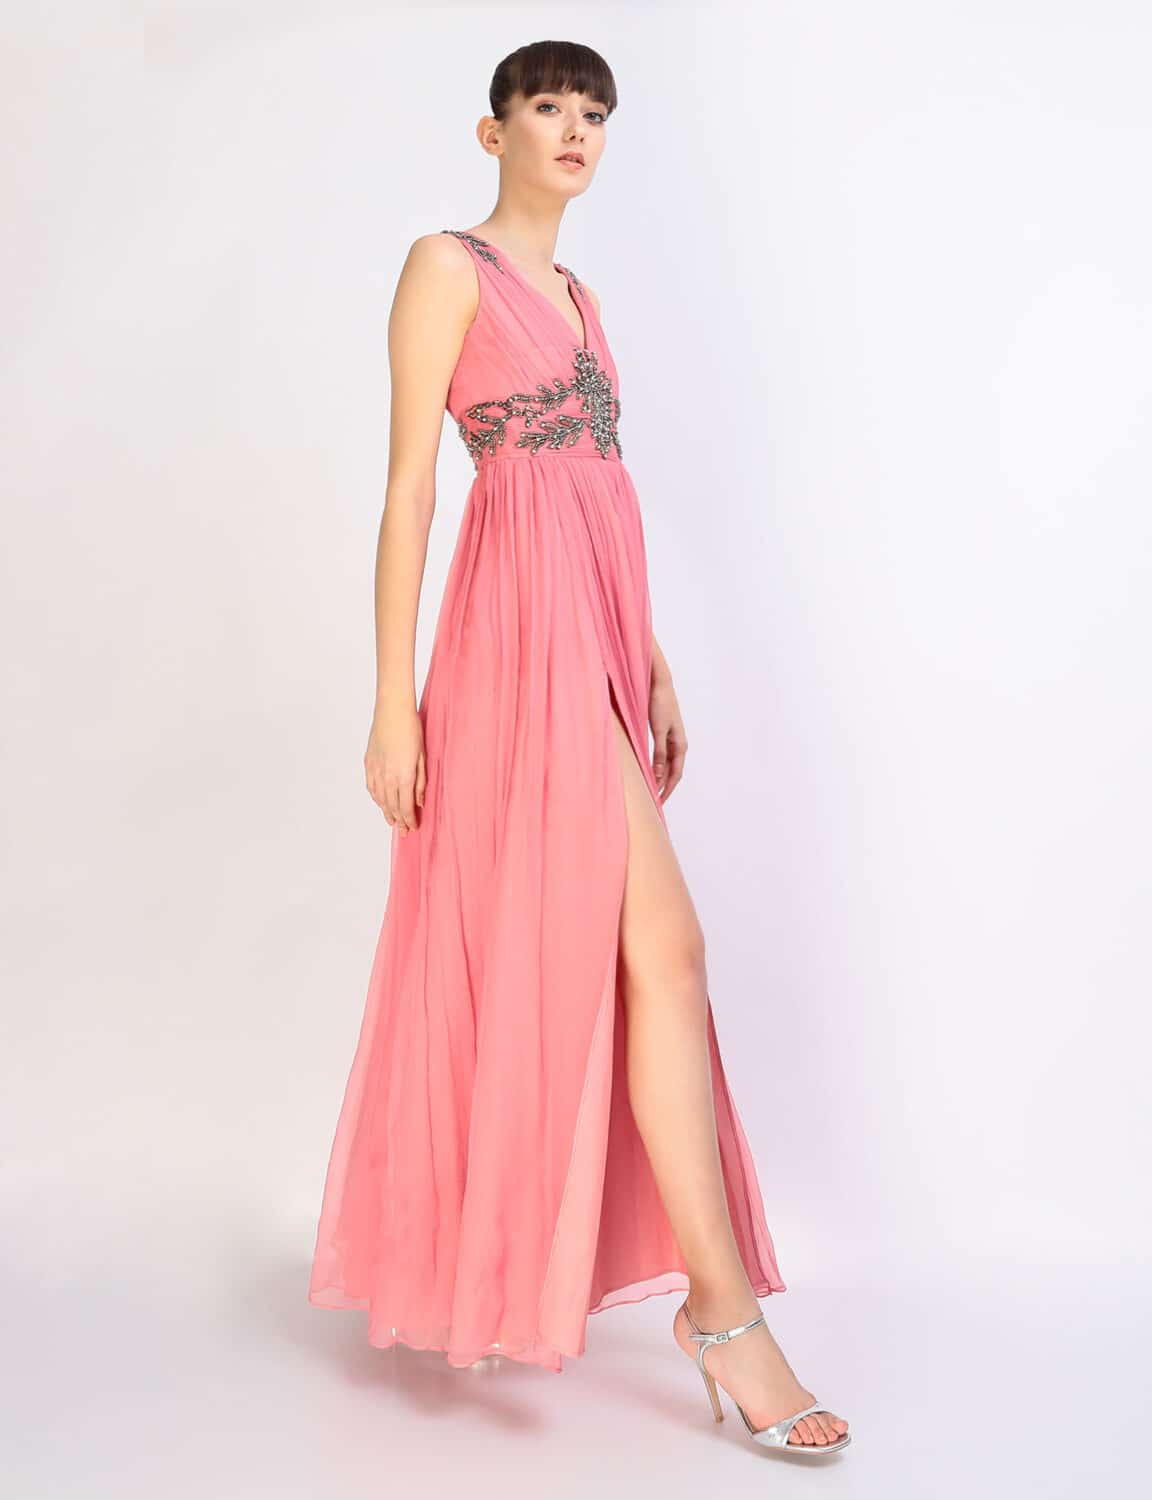 JACQUELINE pink silk long evening dress with silver